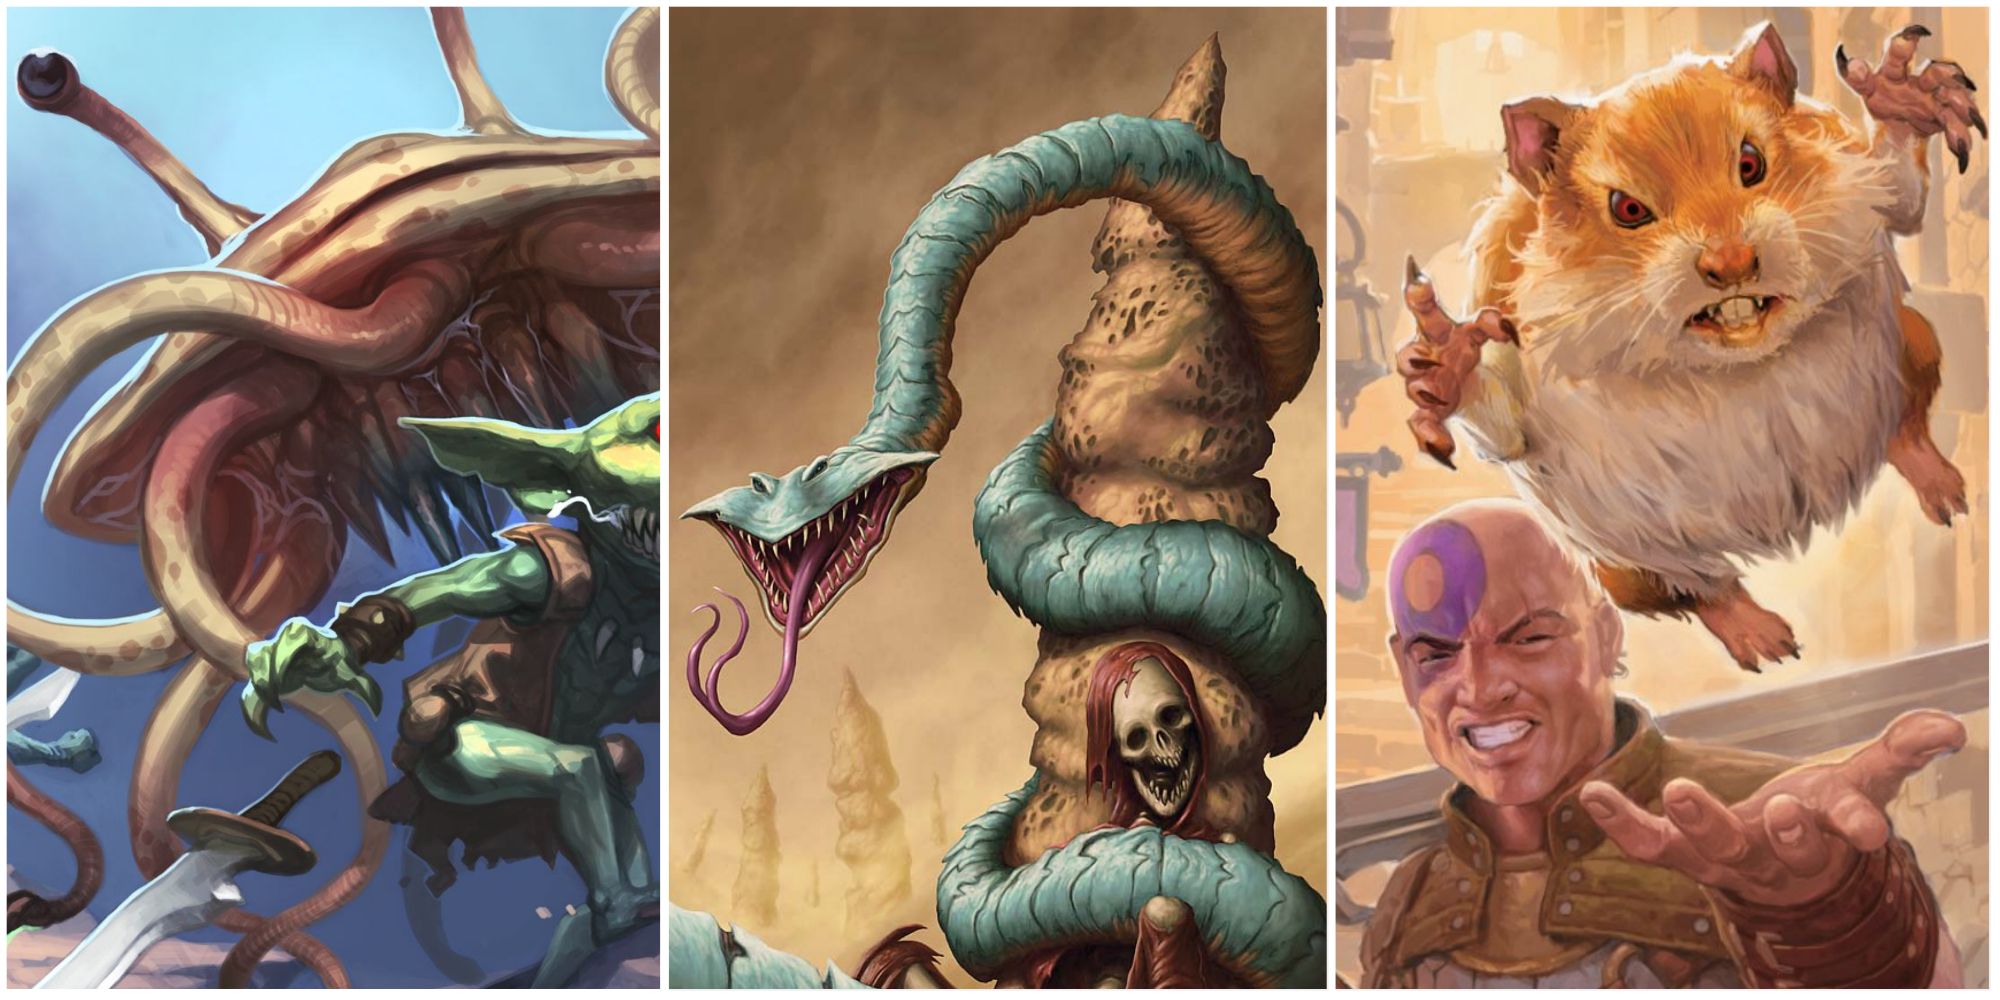 A collage of a flumph, a jellyfish-like creature, attacking Pathfinder goblins, a serpentine creature called a silk wyrm from Dark Sun, and Boo the miniature giant space hamster from Magic the Gathering